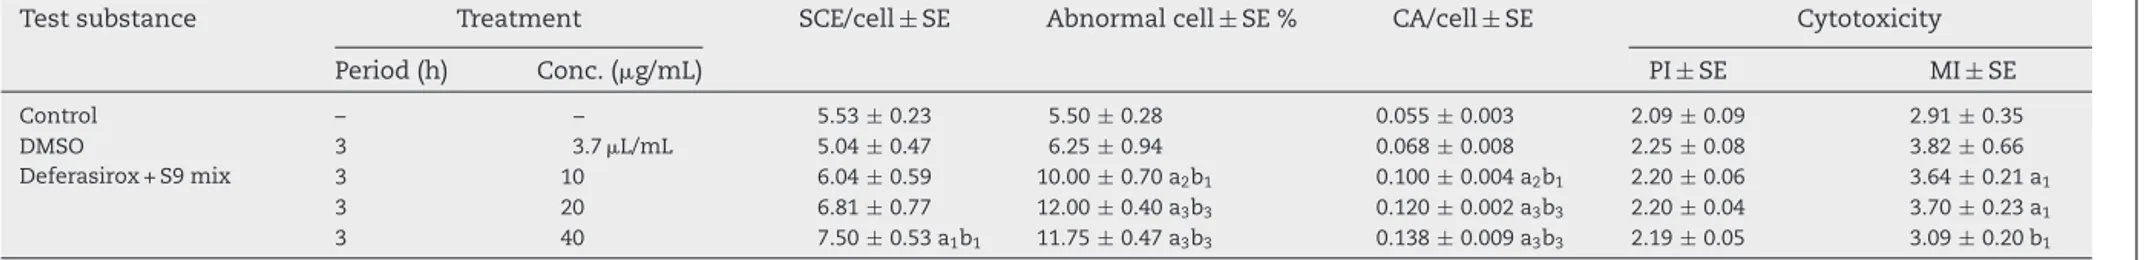 Table 2 – The in vitro sister chromatid exchange, abnormal cell percentage, CA/cell ratio, proliferation index (PI), and mitotic index (MI) values caused by the deferasirox in the human peripheral lymphocytes in the presence of metabolic activator (S9 mix)